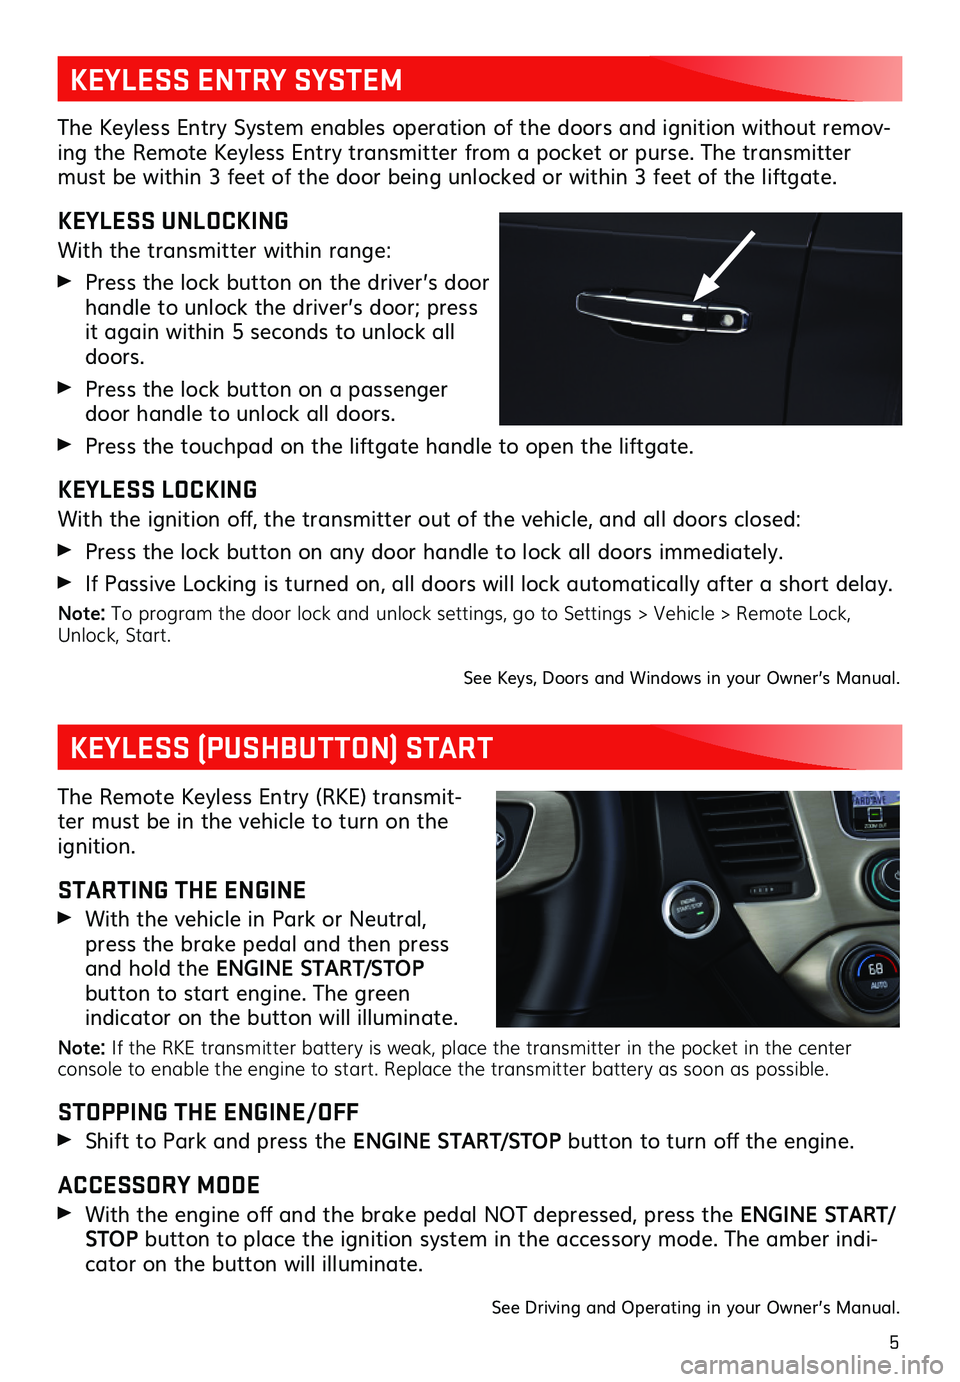 GMC YUKON XL 2019  Get To Know Guide 5
The Keyless Entry System enables operation of the doors and ignition without remov-ing the Remote Keyless Entry transmitter from a pocket or purse. The transmitter must be within 3 feet of the door 